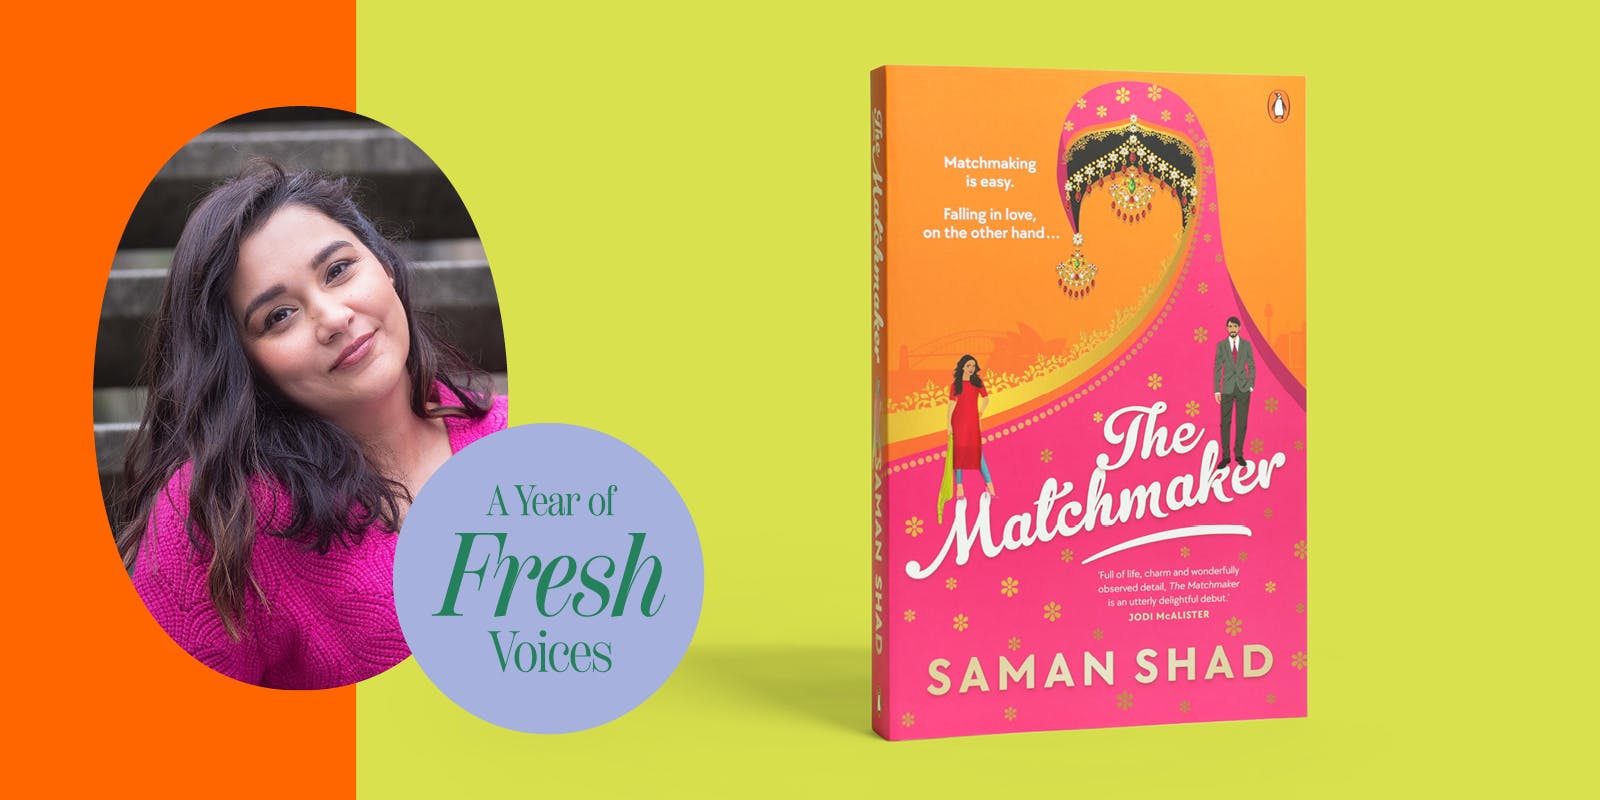 Saman Shad talks about four years of working on 'The Matchmaker'